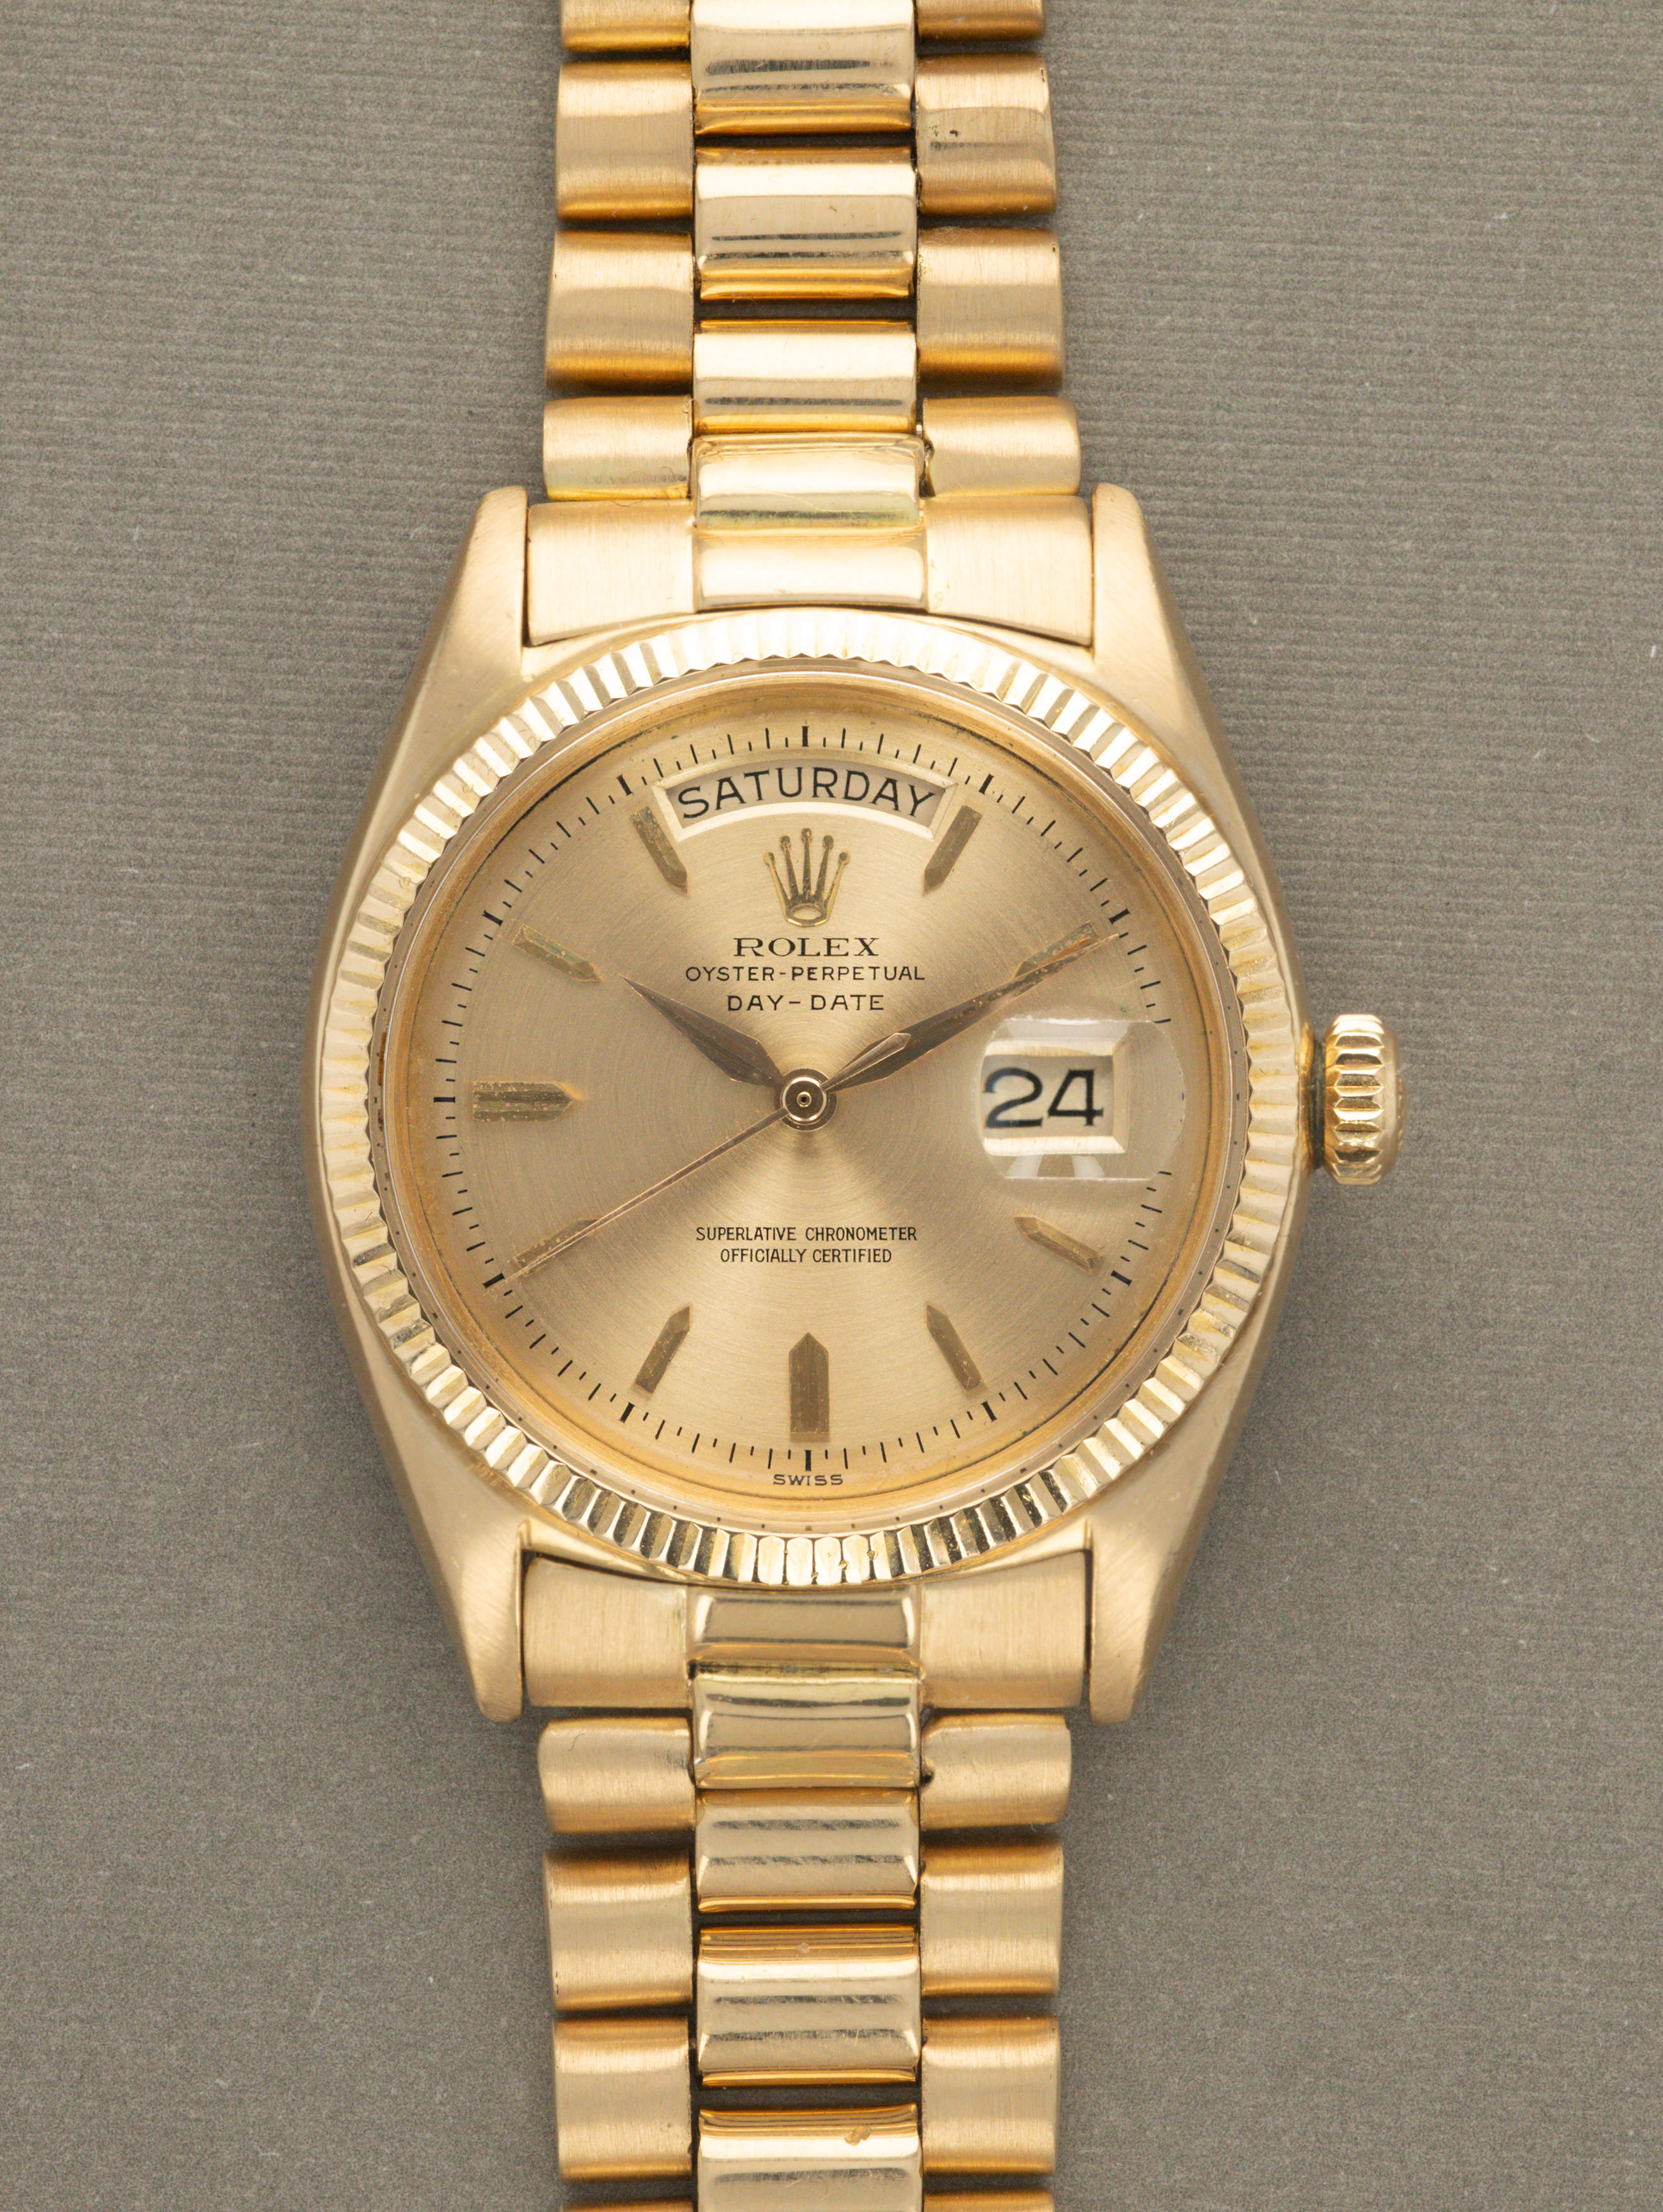 Rolex Day-Date Ref. 1803 - 'Concentric' Dial